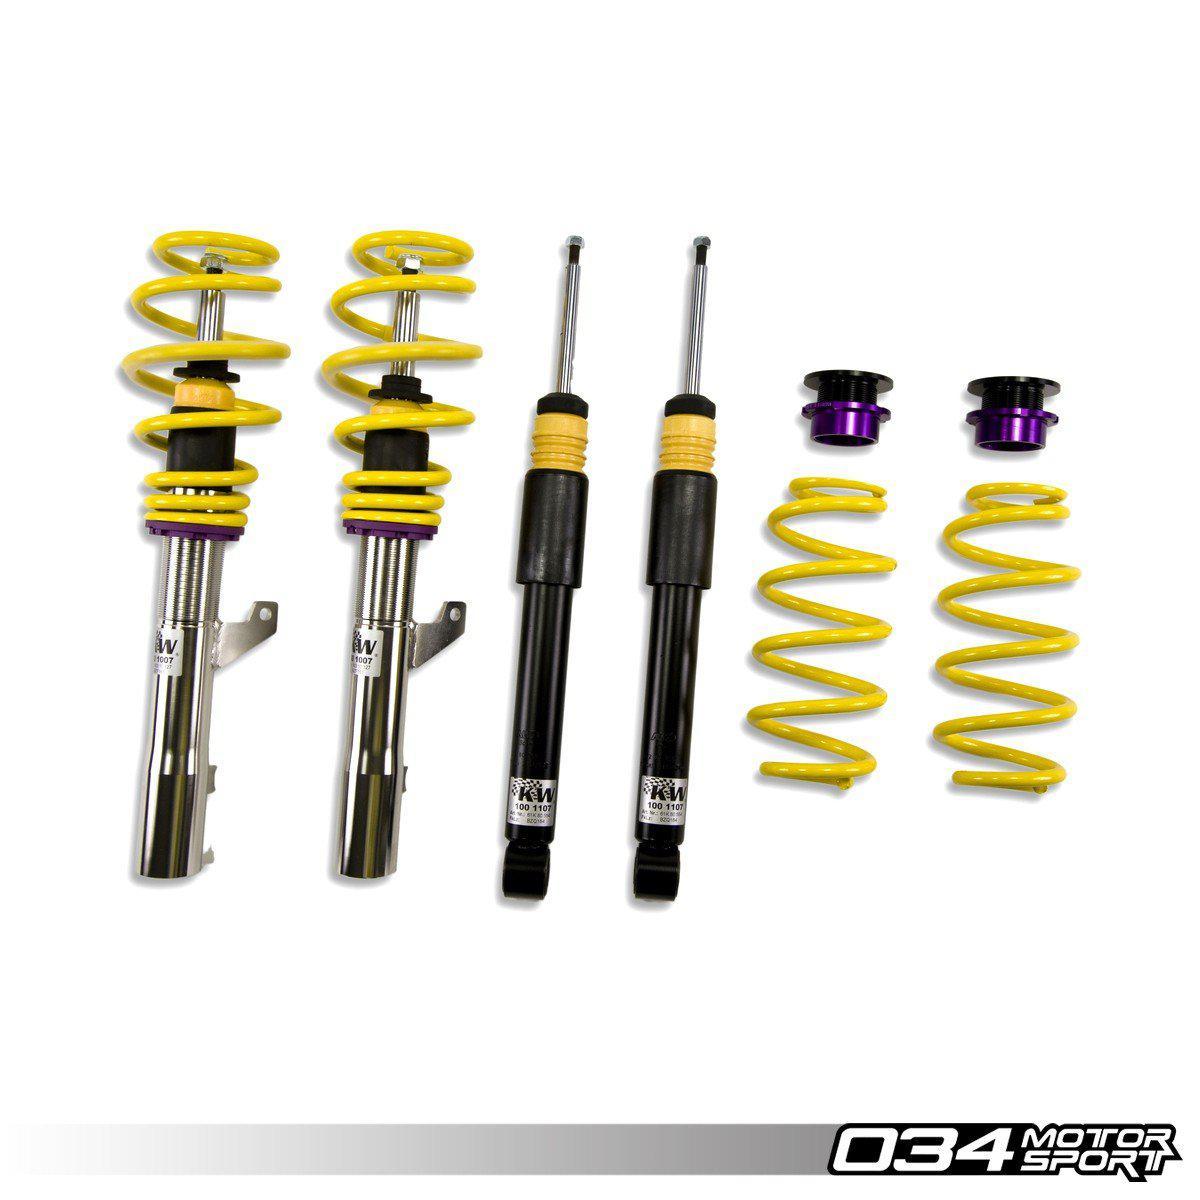 KW Variant 1 Coilover Suspension, MKVI Volkswagen Golf R W/ Dcc-A Little Tuning Co